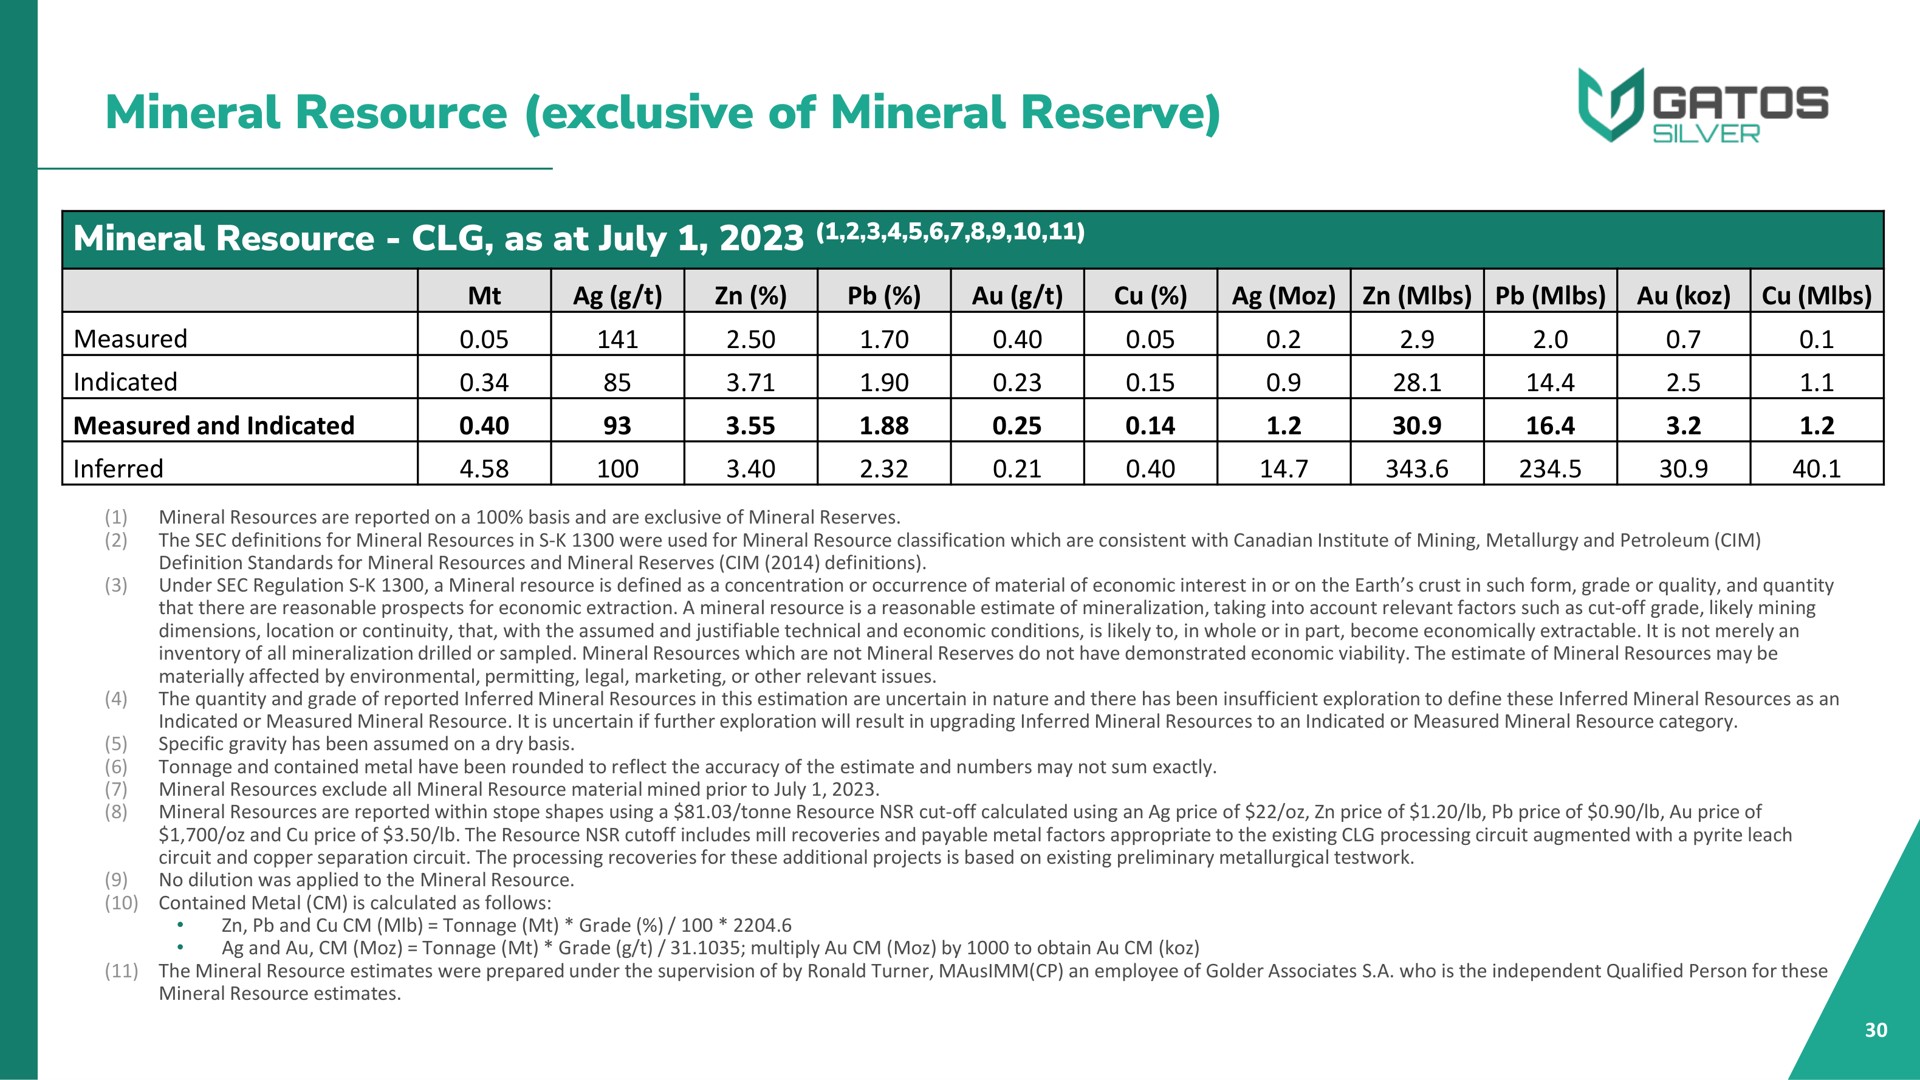 mineral resource exclusive of mineral reserve mineral resource as at ing an a measured indicated aes a apa a a a am a a | Gatos Silver